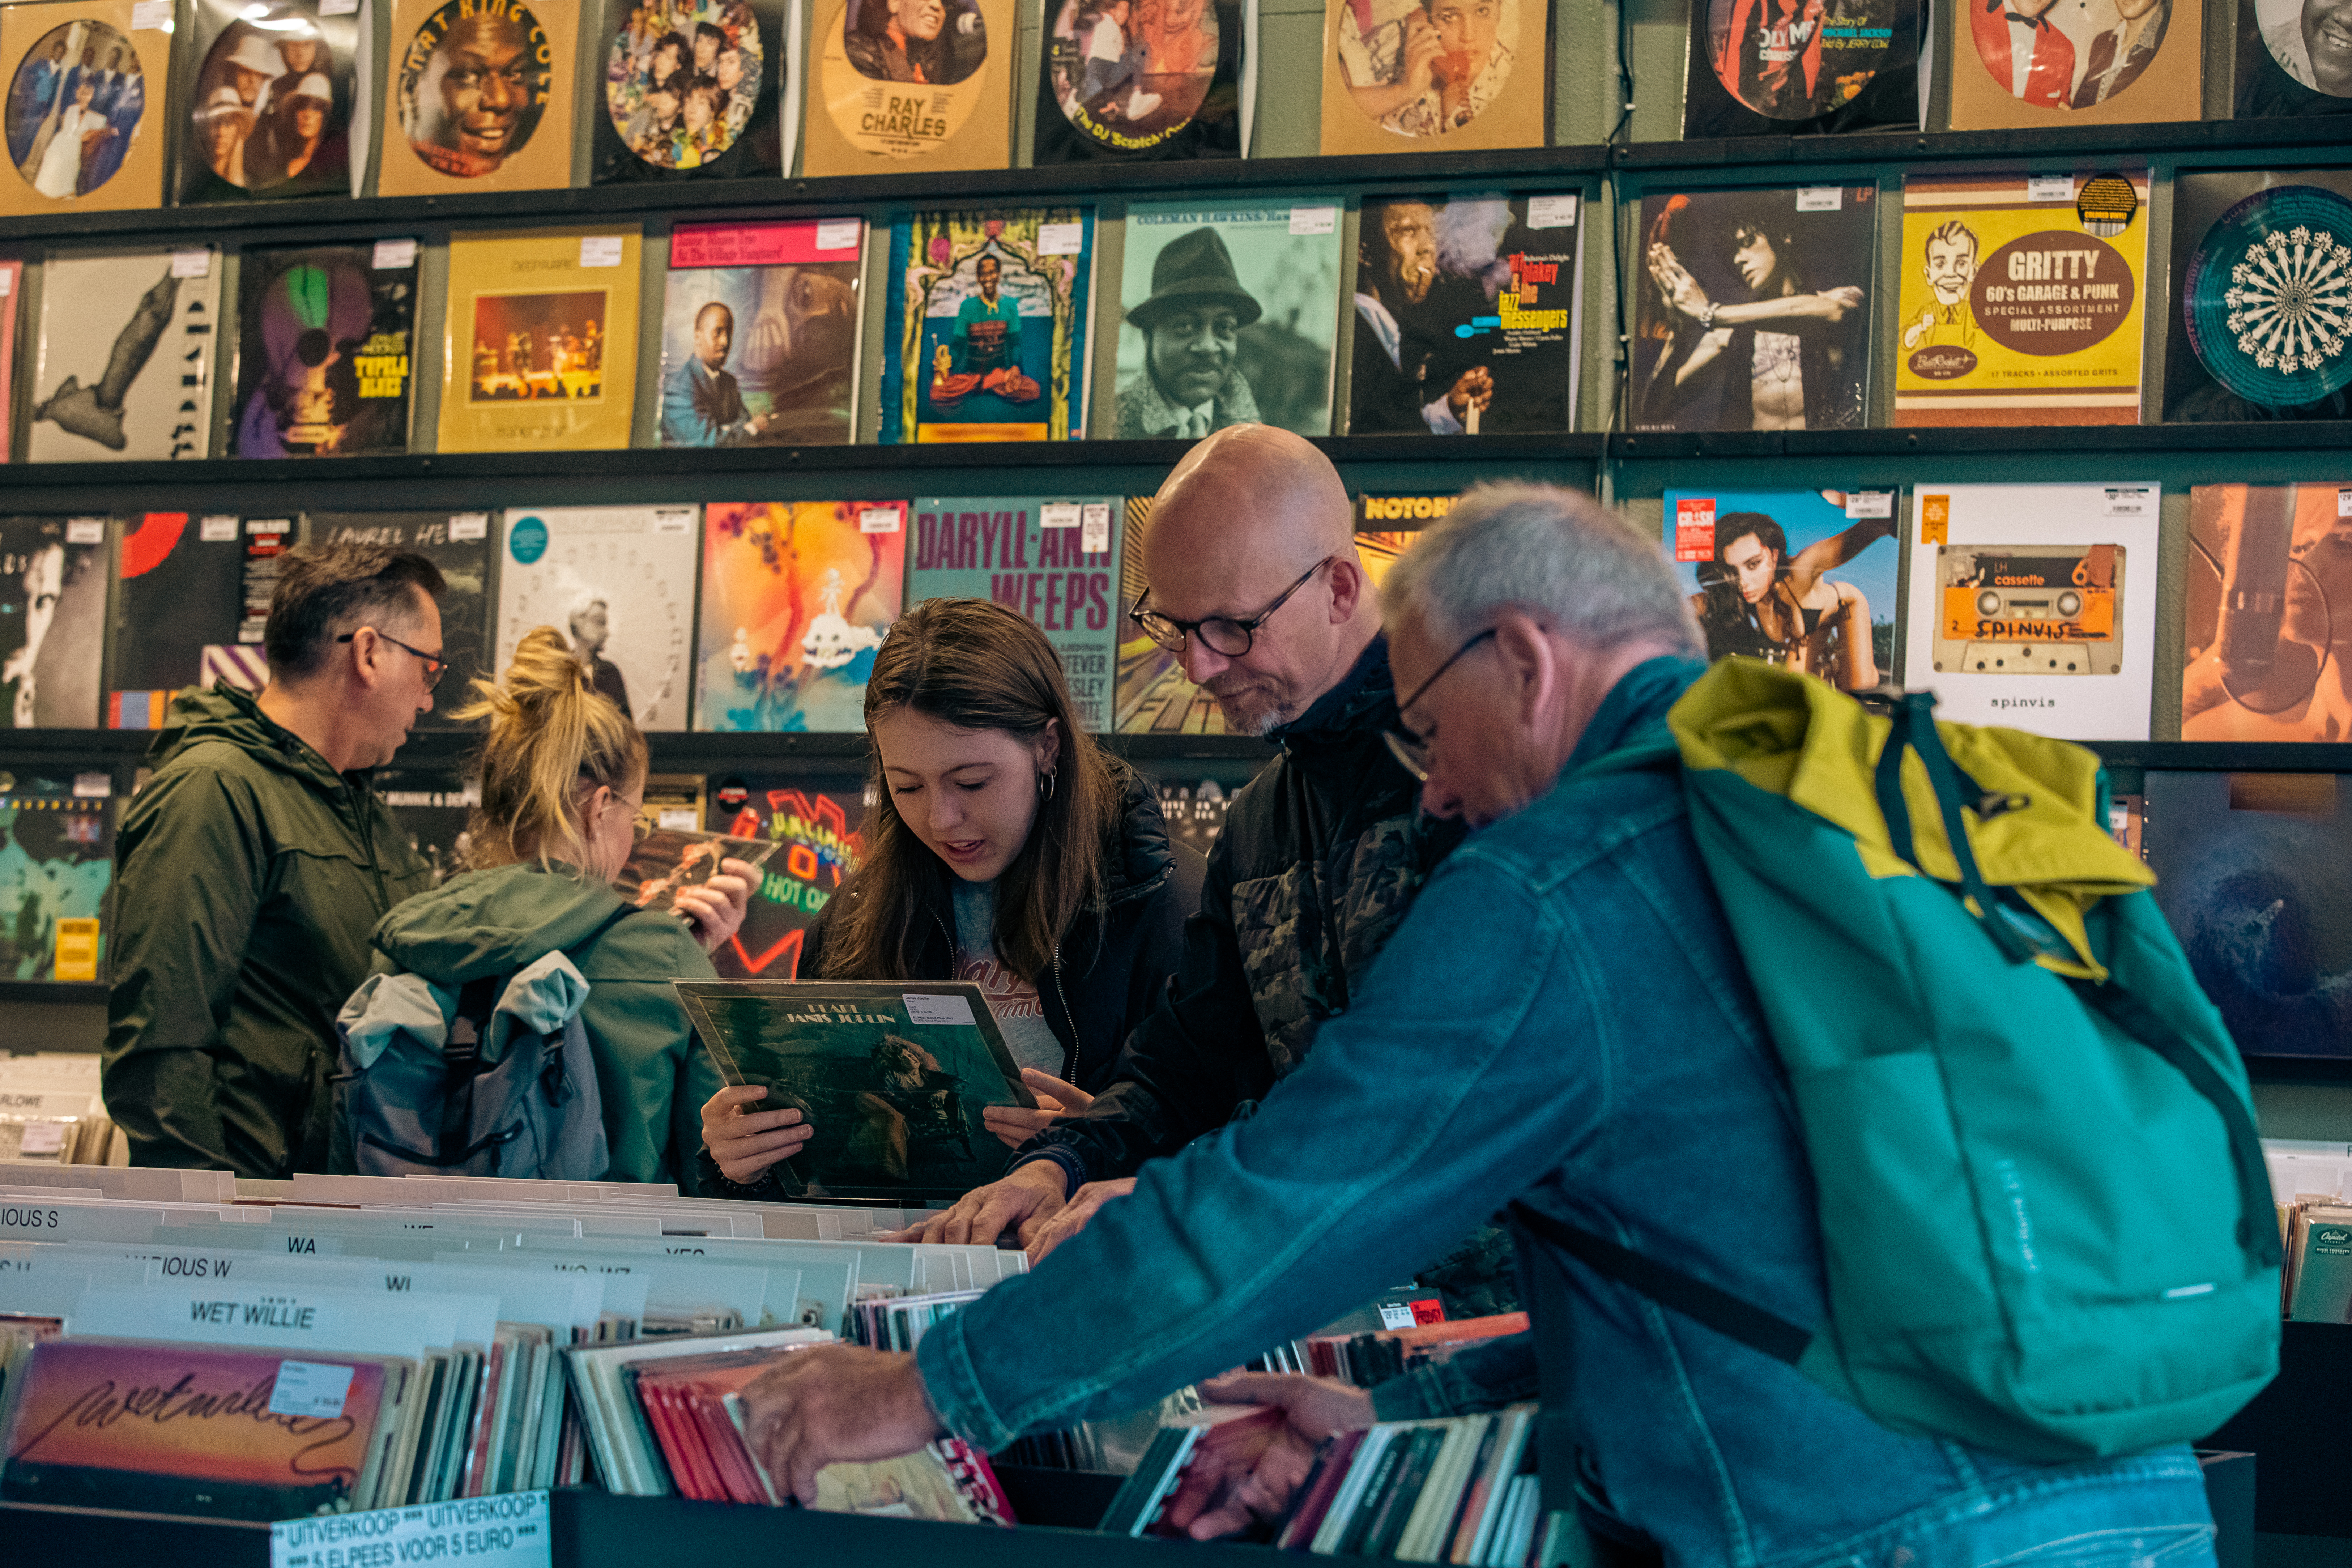 Crate digging family on Record Store Day